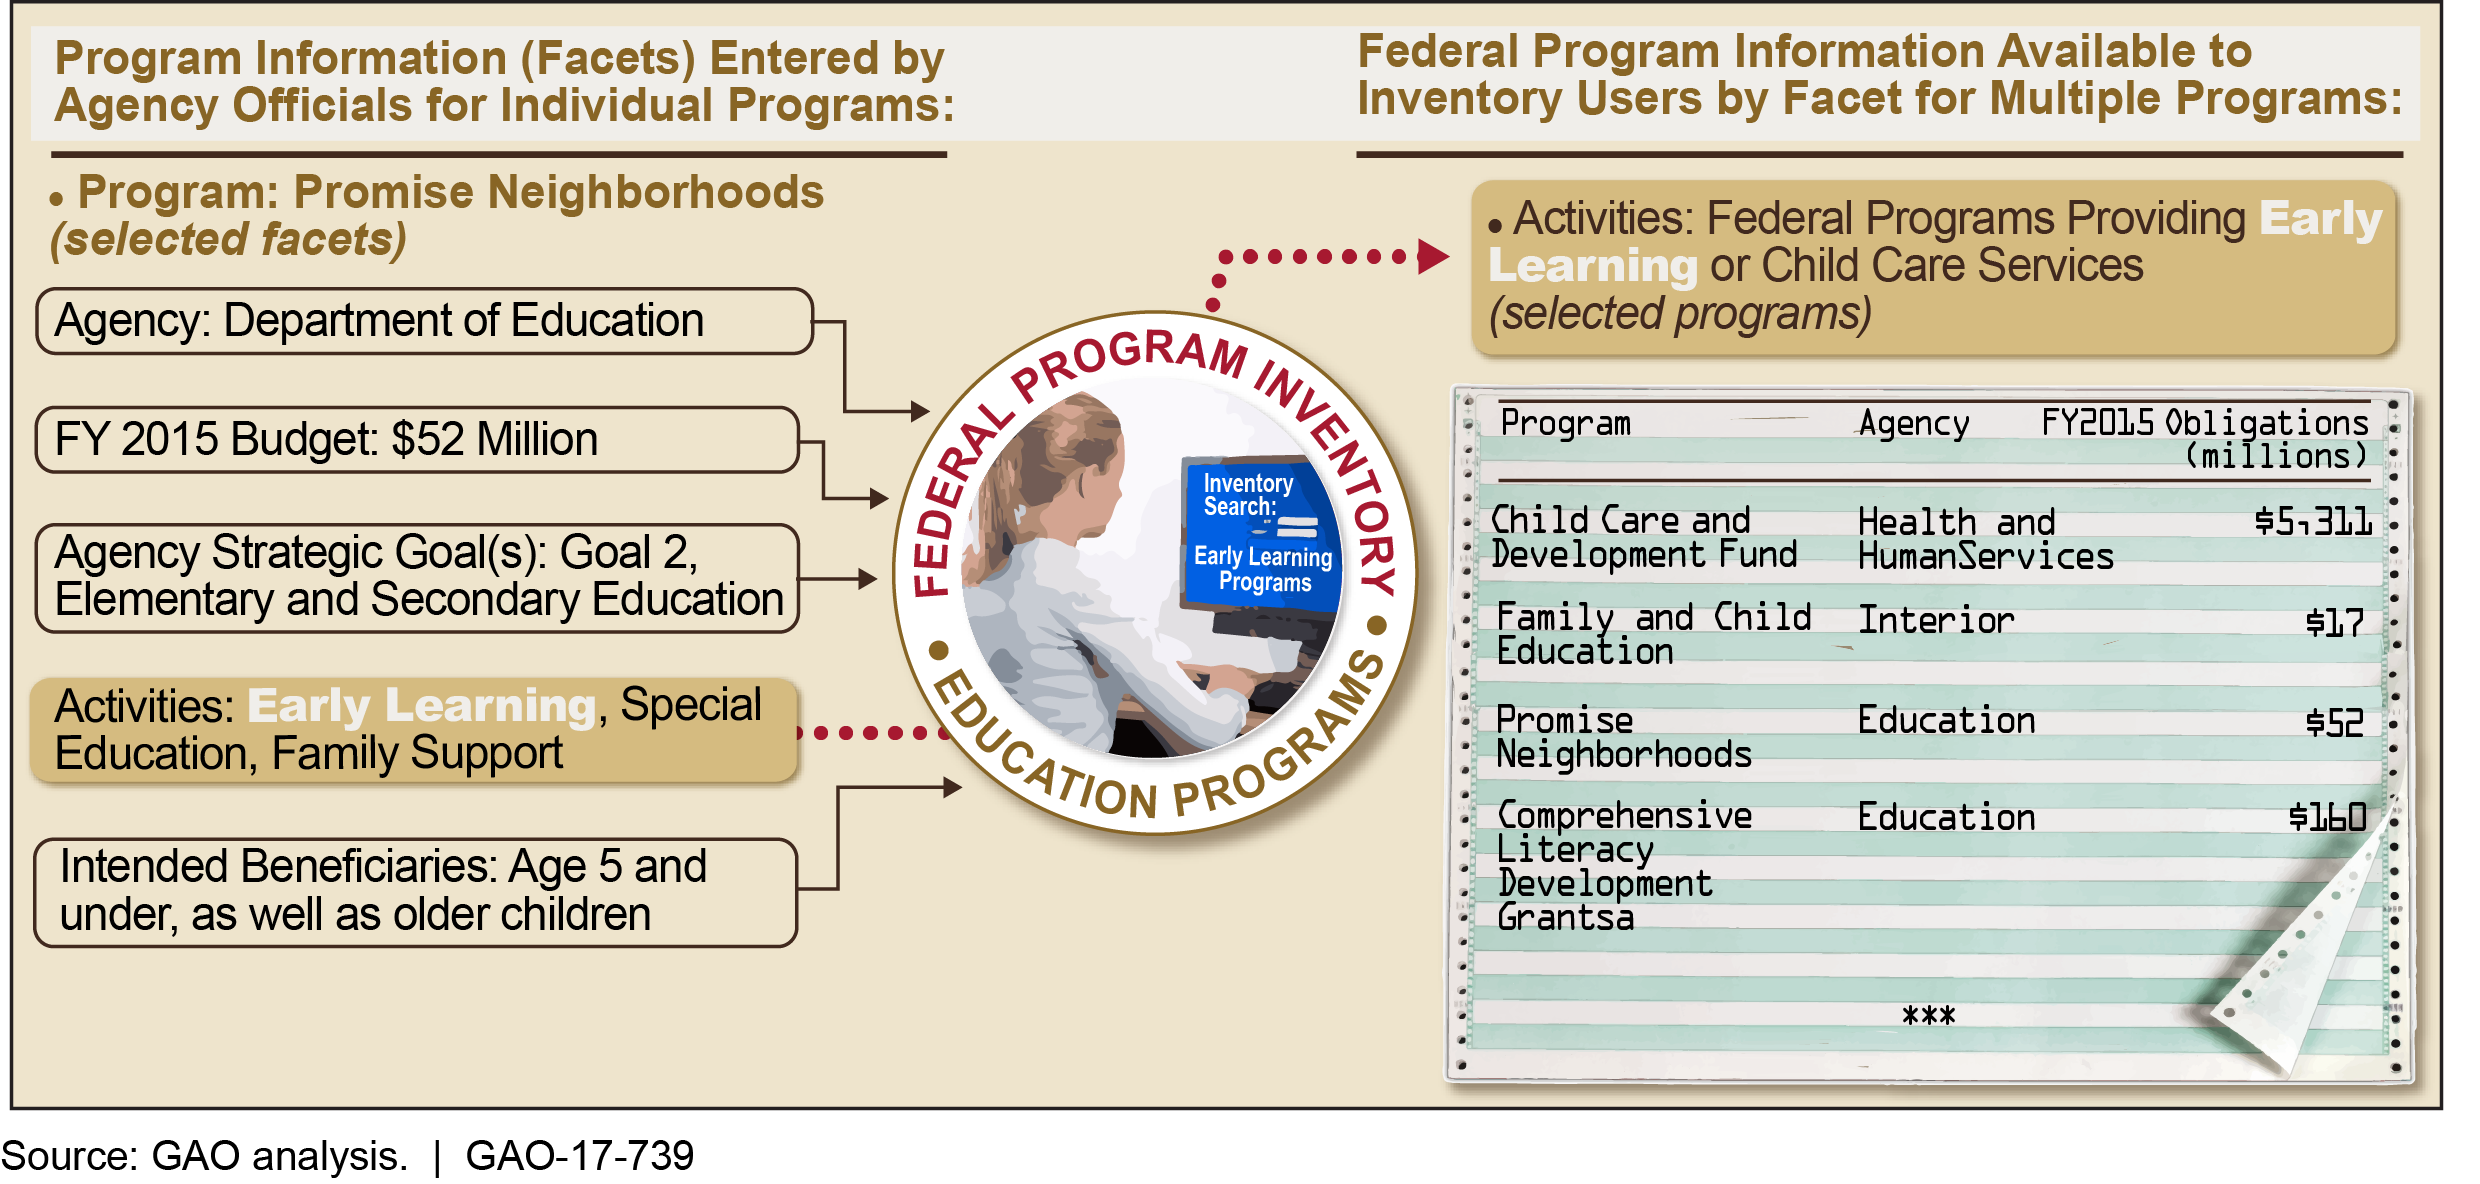 Potential Process for Developing a Federal Program Inventory Based on Information Architecture